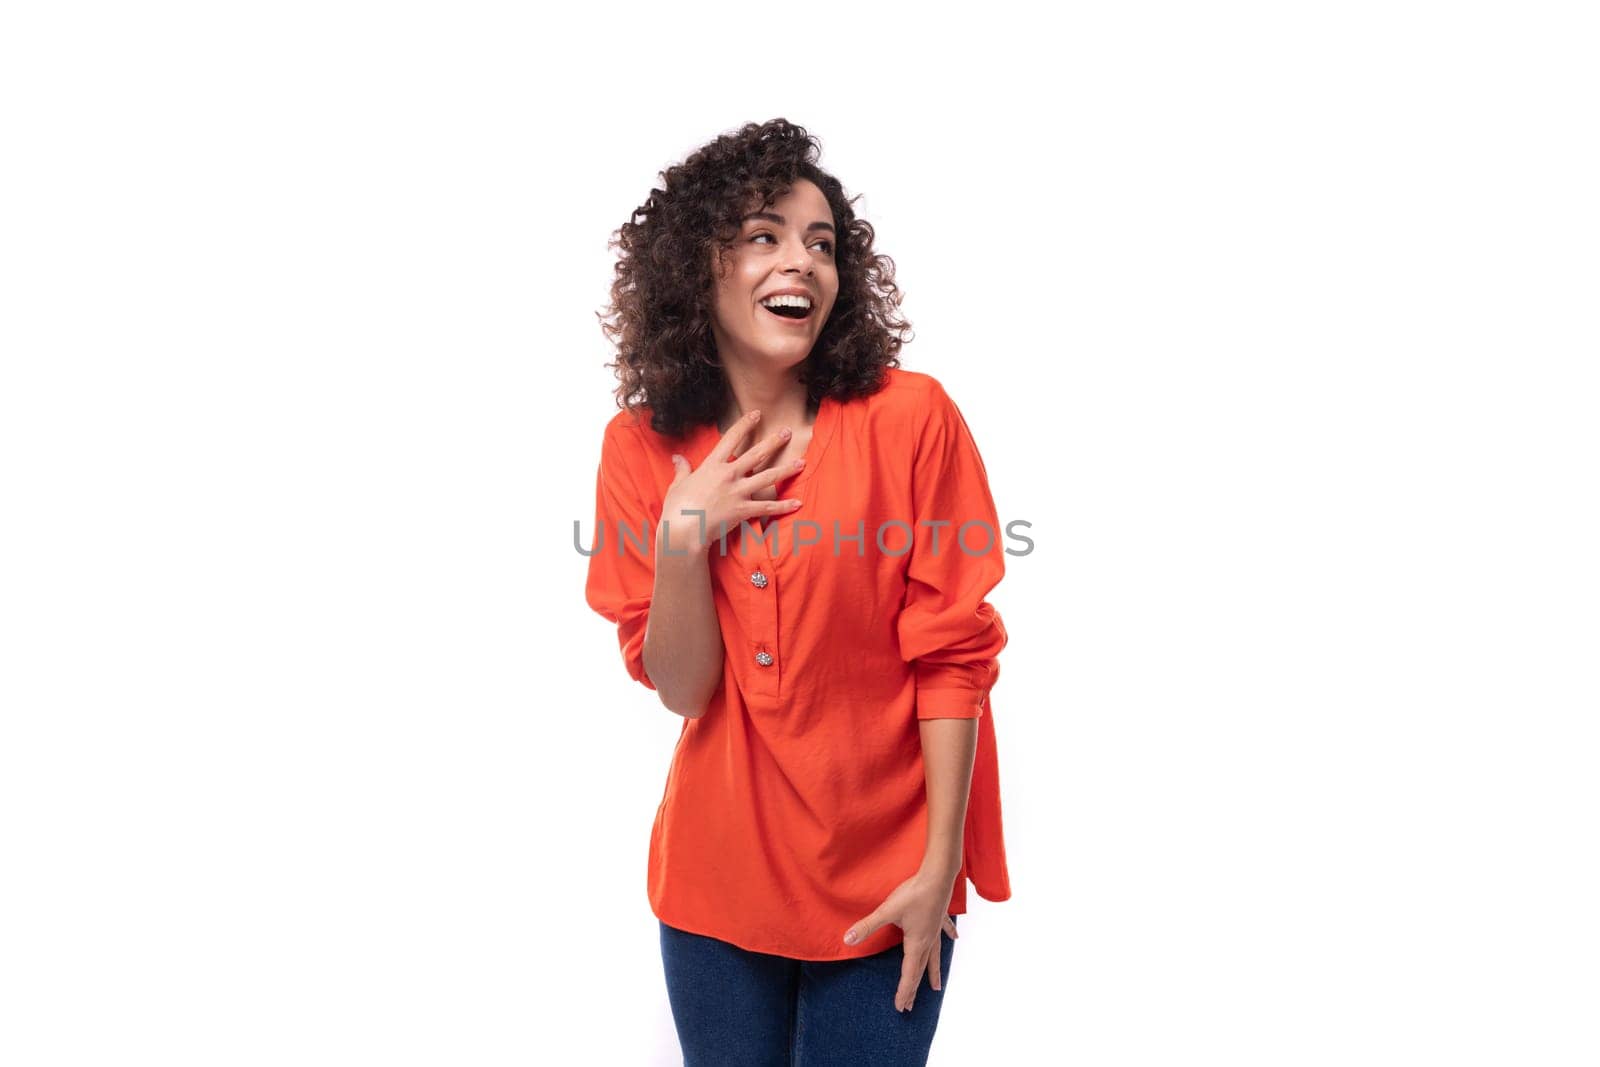 young cheerful caucasian lady with curly hair style dressed in orange shirt by TRMK